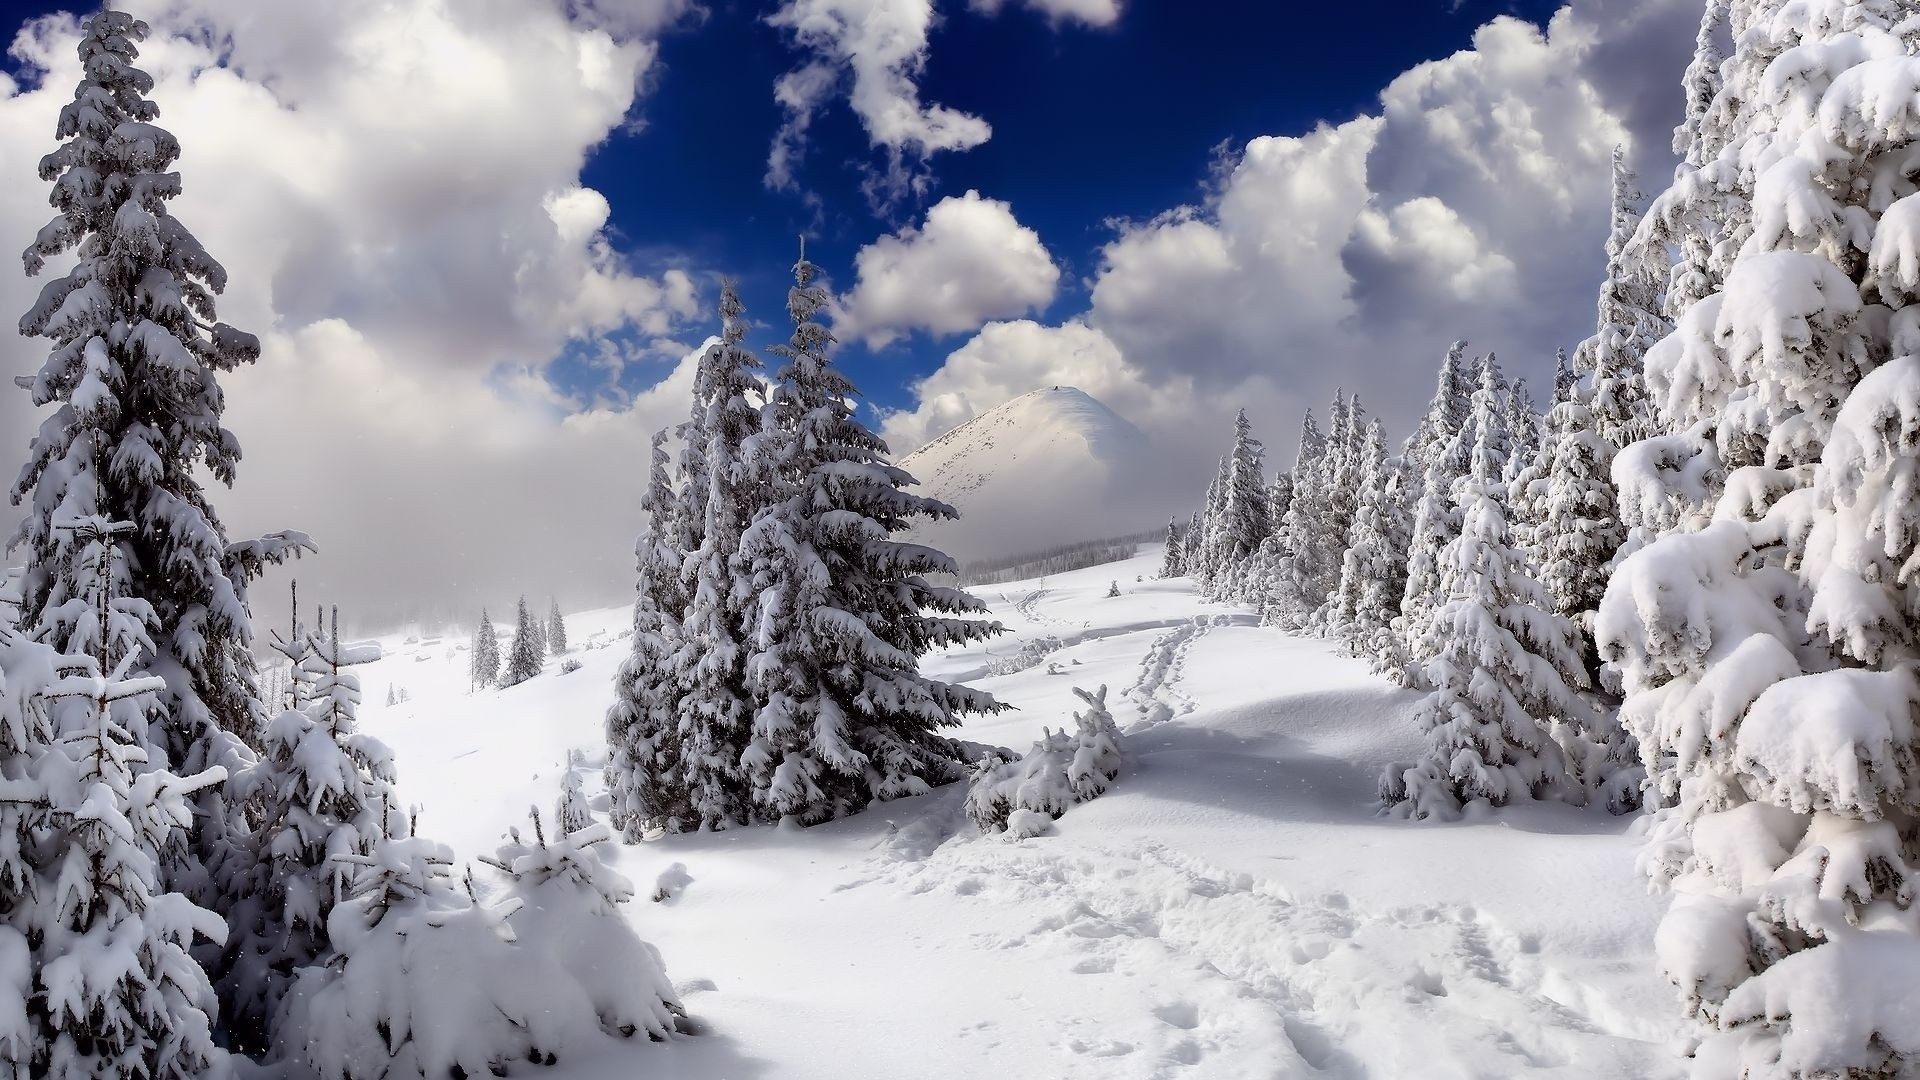 General 1920x1080 snow trees mountains nature cold outdoors landscape